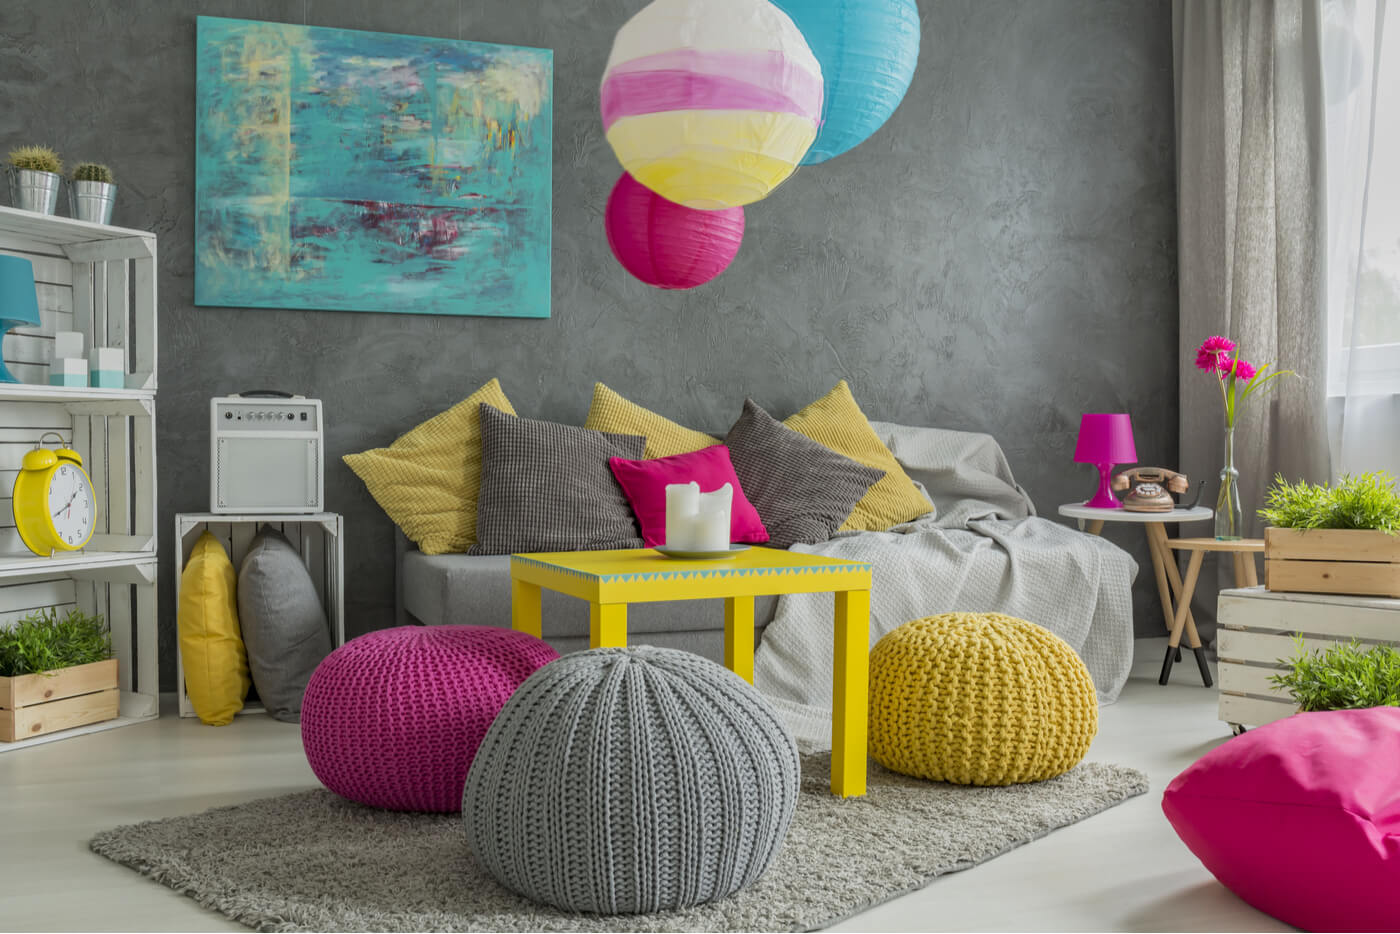 Decorate with colorful furniture without fear of being wrong